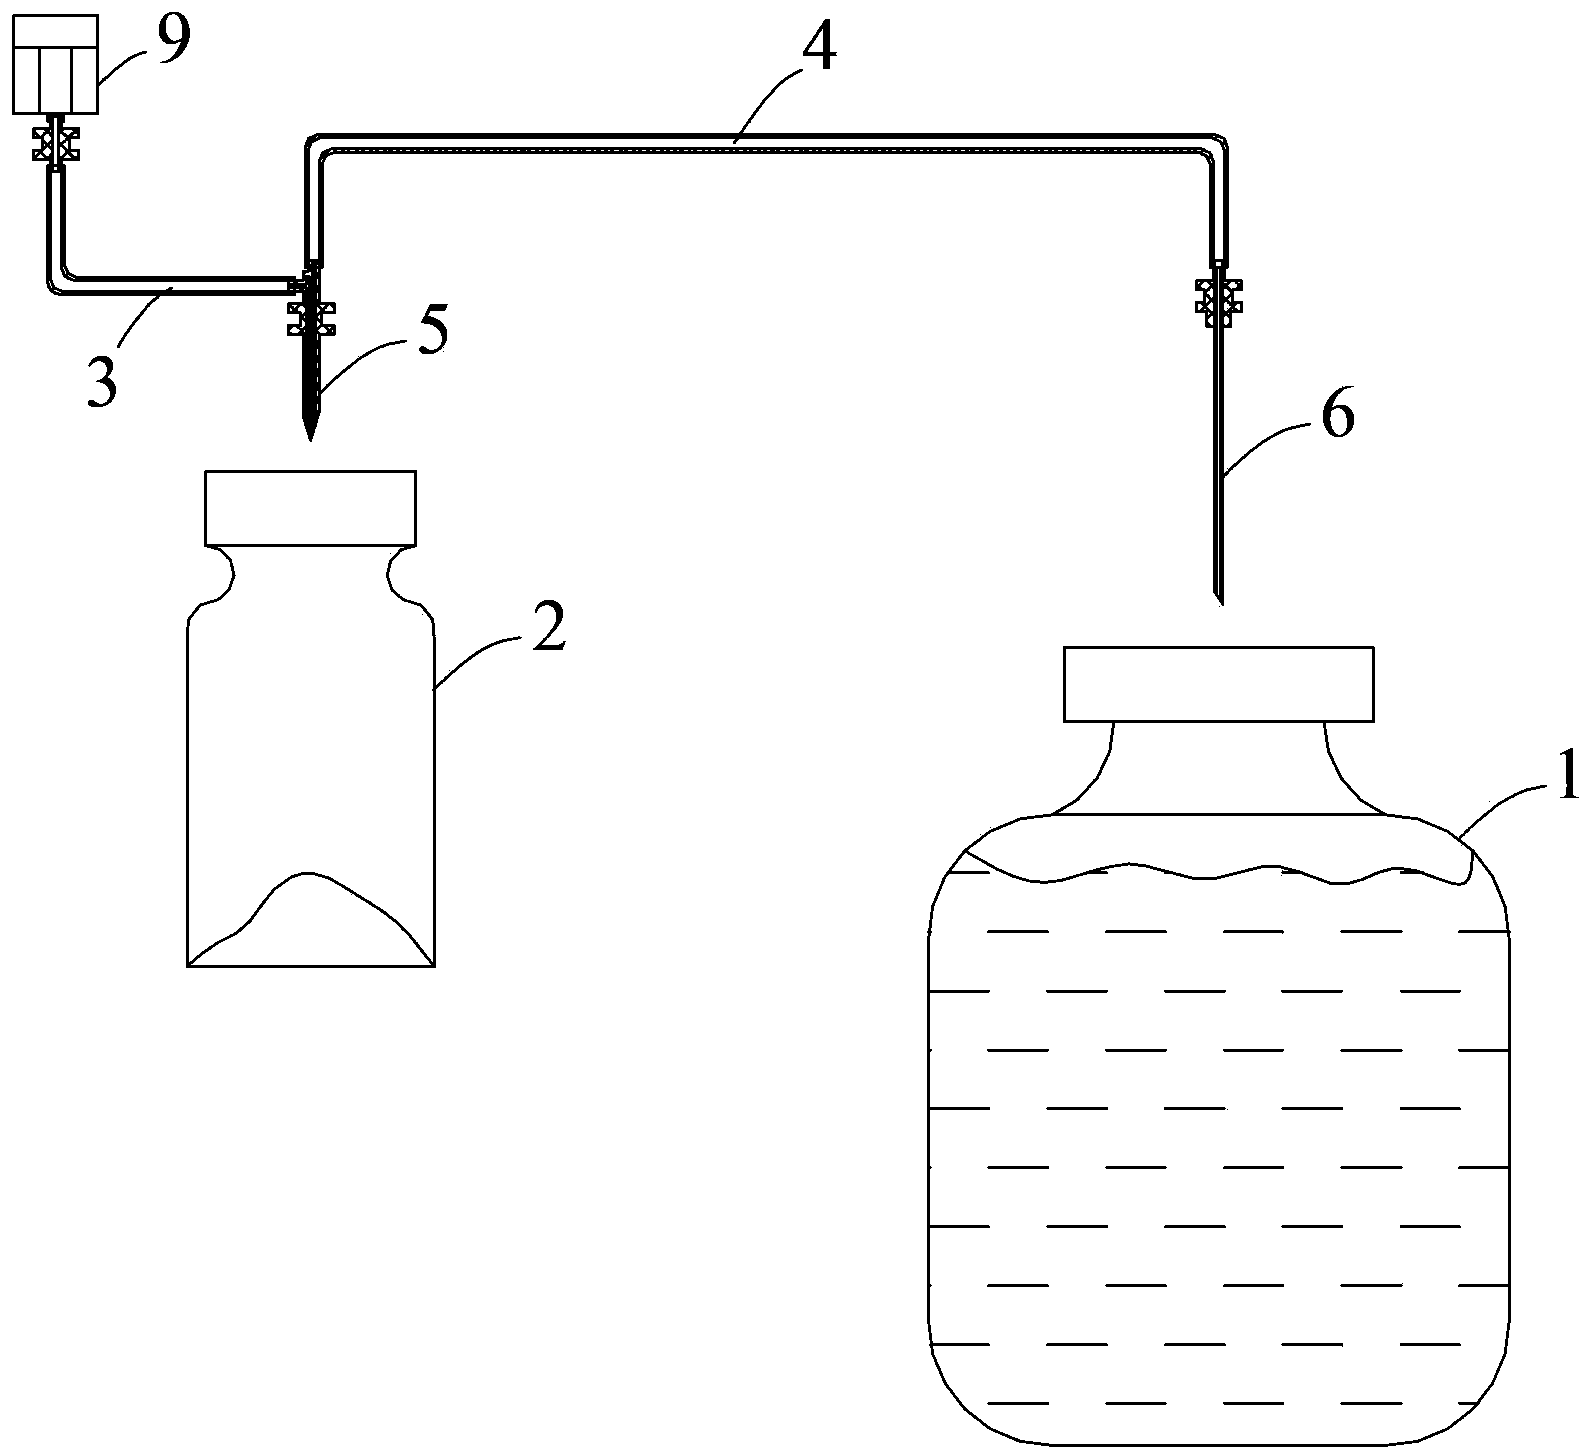 Dispensing method used for injection powder bottle and dispensing device